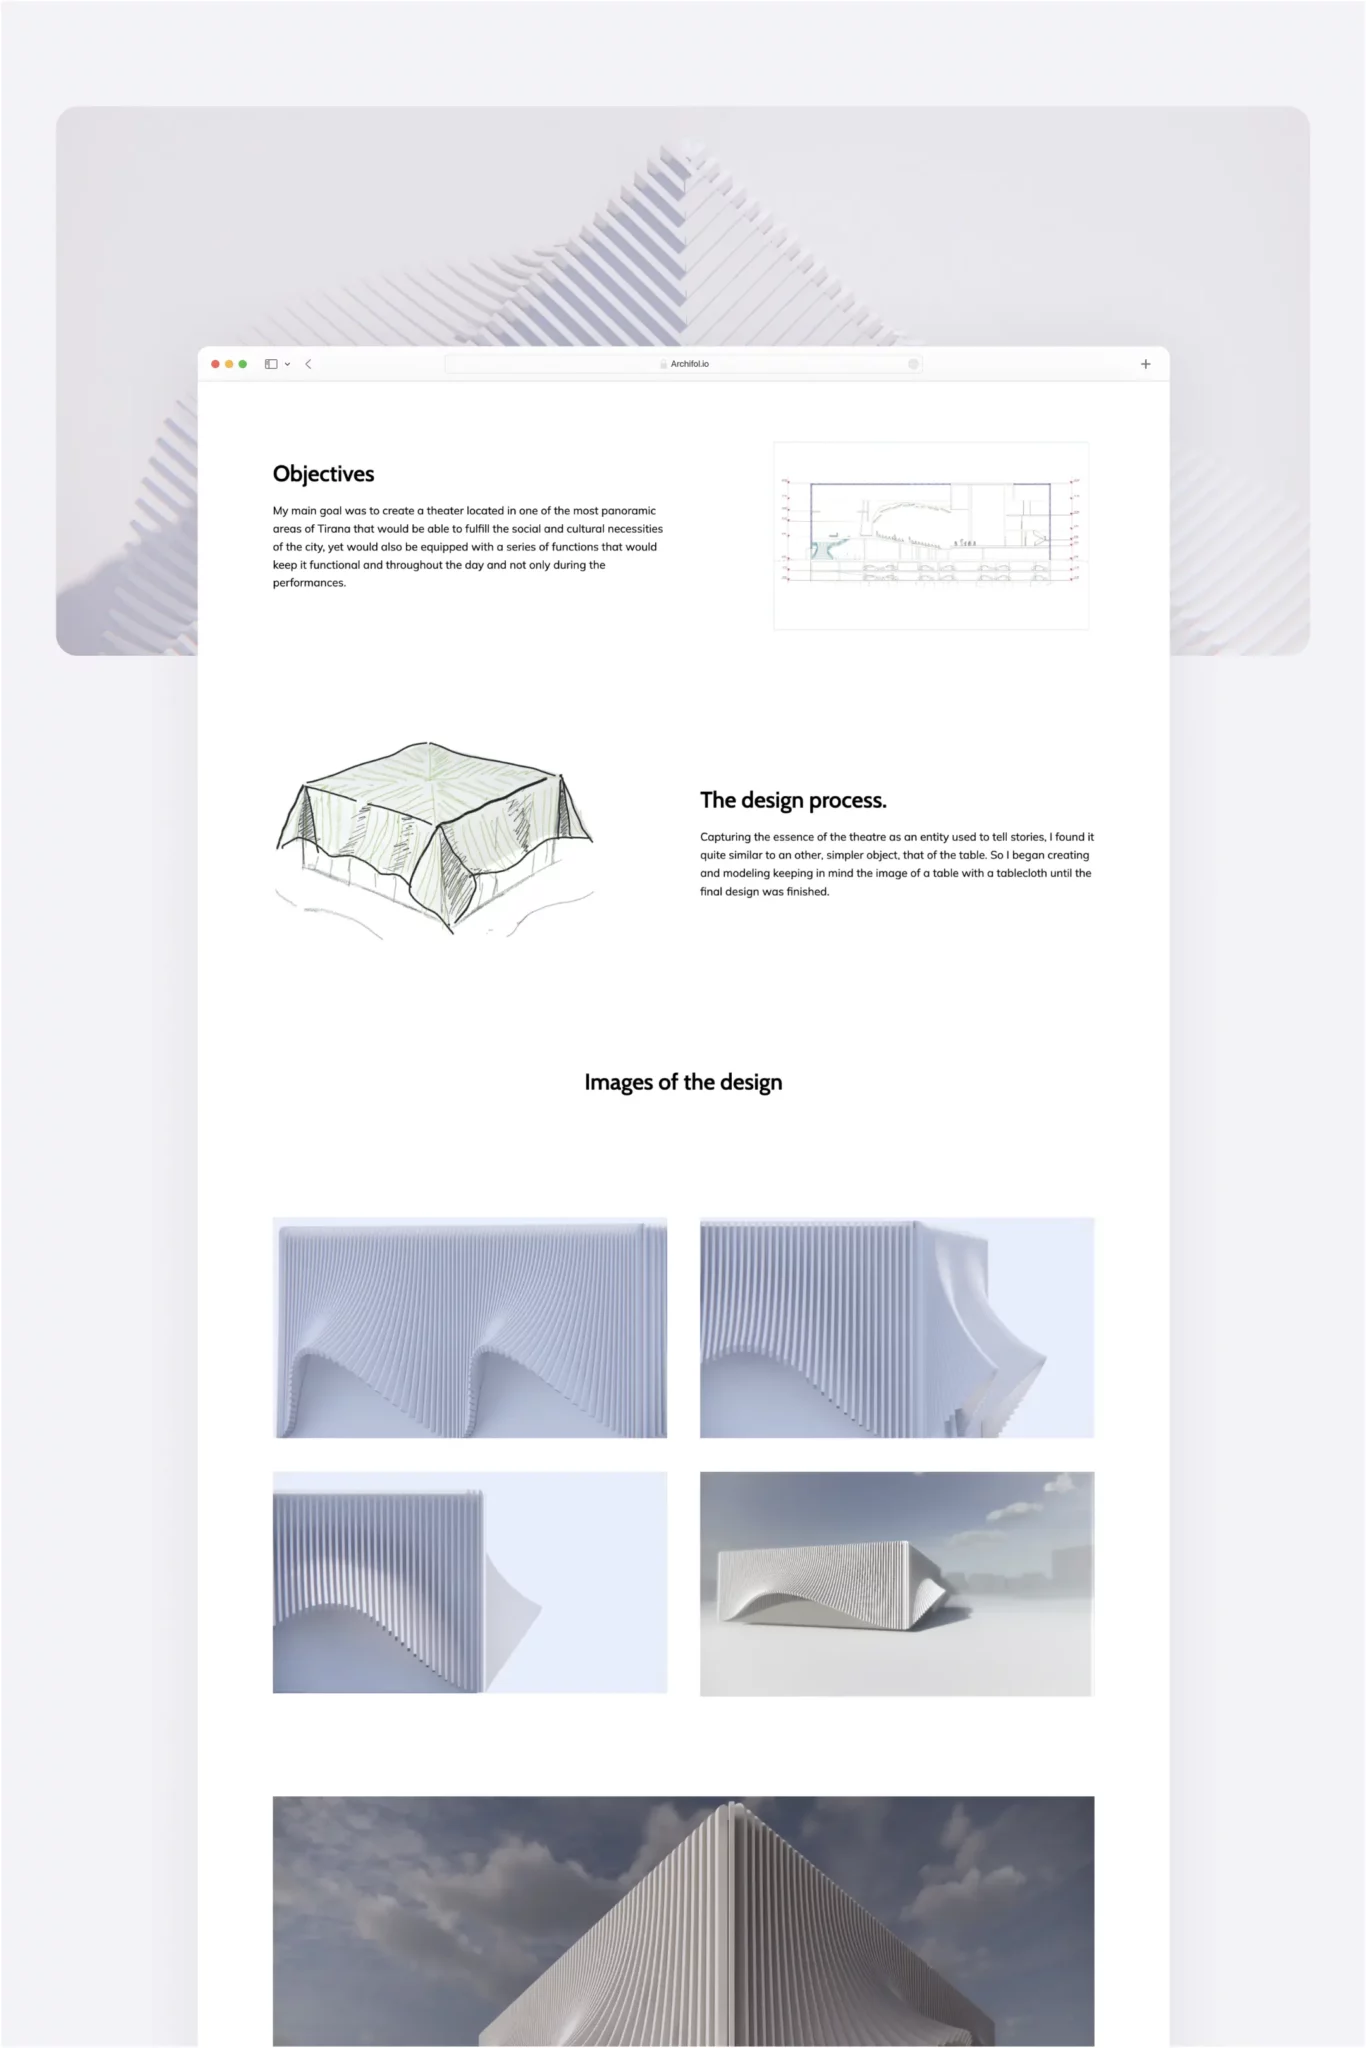 Samuel Kurti's portfolio. His website has a white background with some colored imagery. He writes about his objectives and his design process before showcasing his architectural designs.